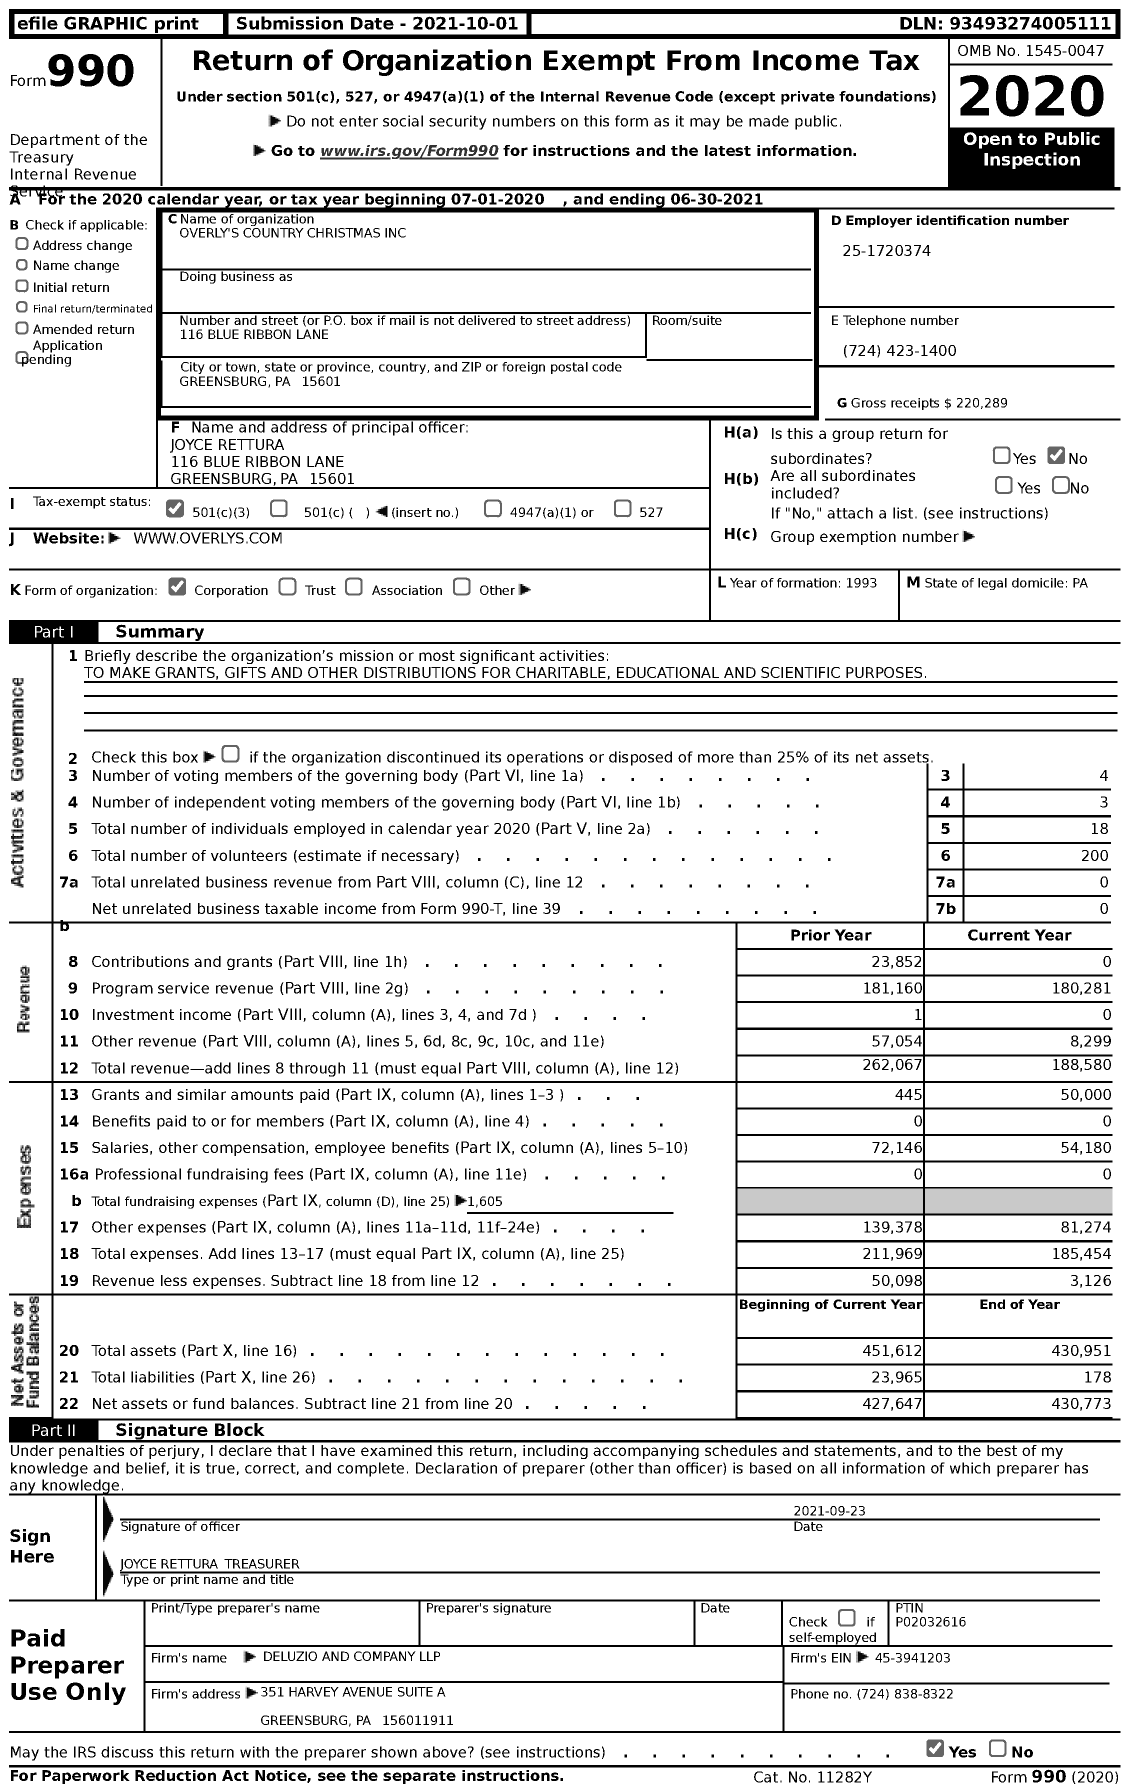 Image of first page of 2020 Form 990 for Overly's Country Christmas